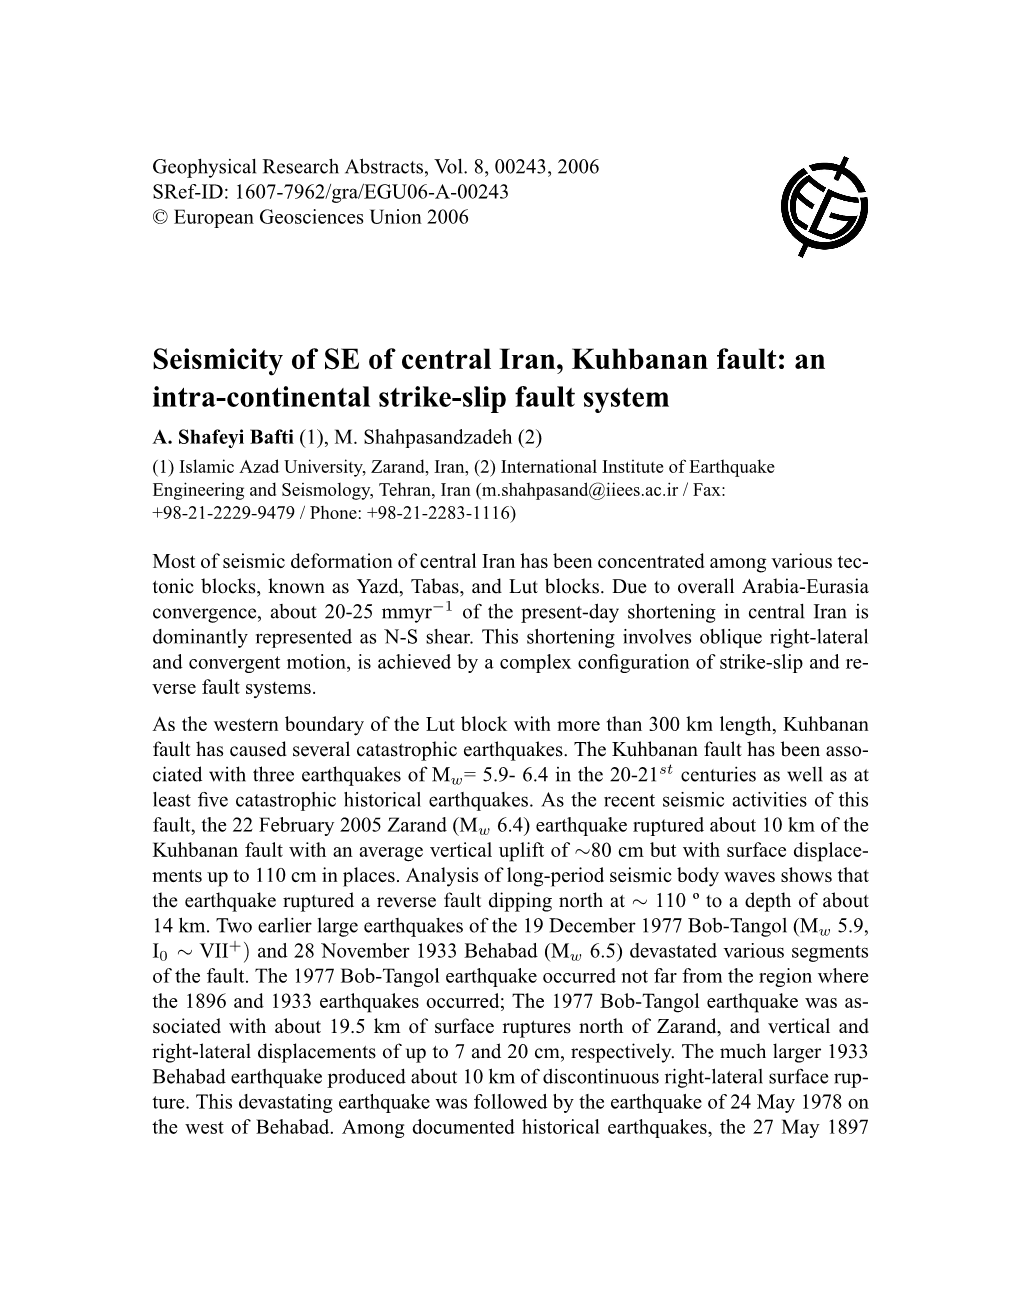 Seismicity of SE of Central Iran, Kuhbanan Fault: an Intra-Continental Strike-Slip Fault System A